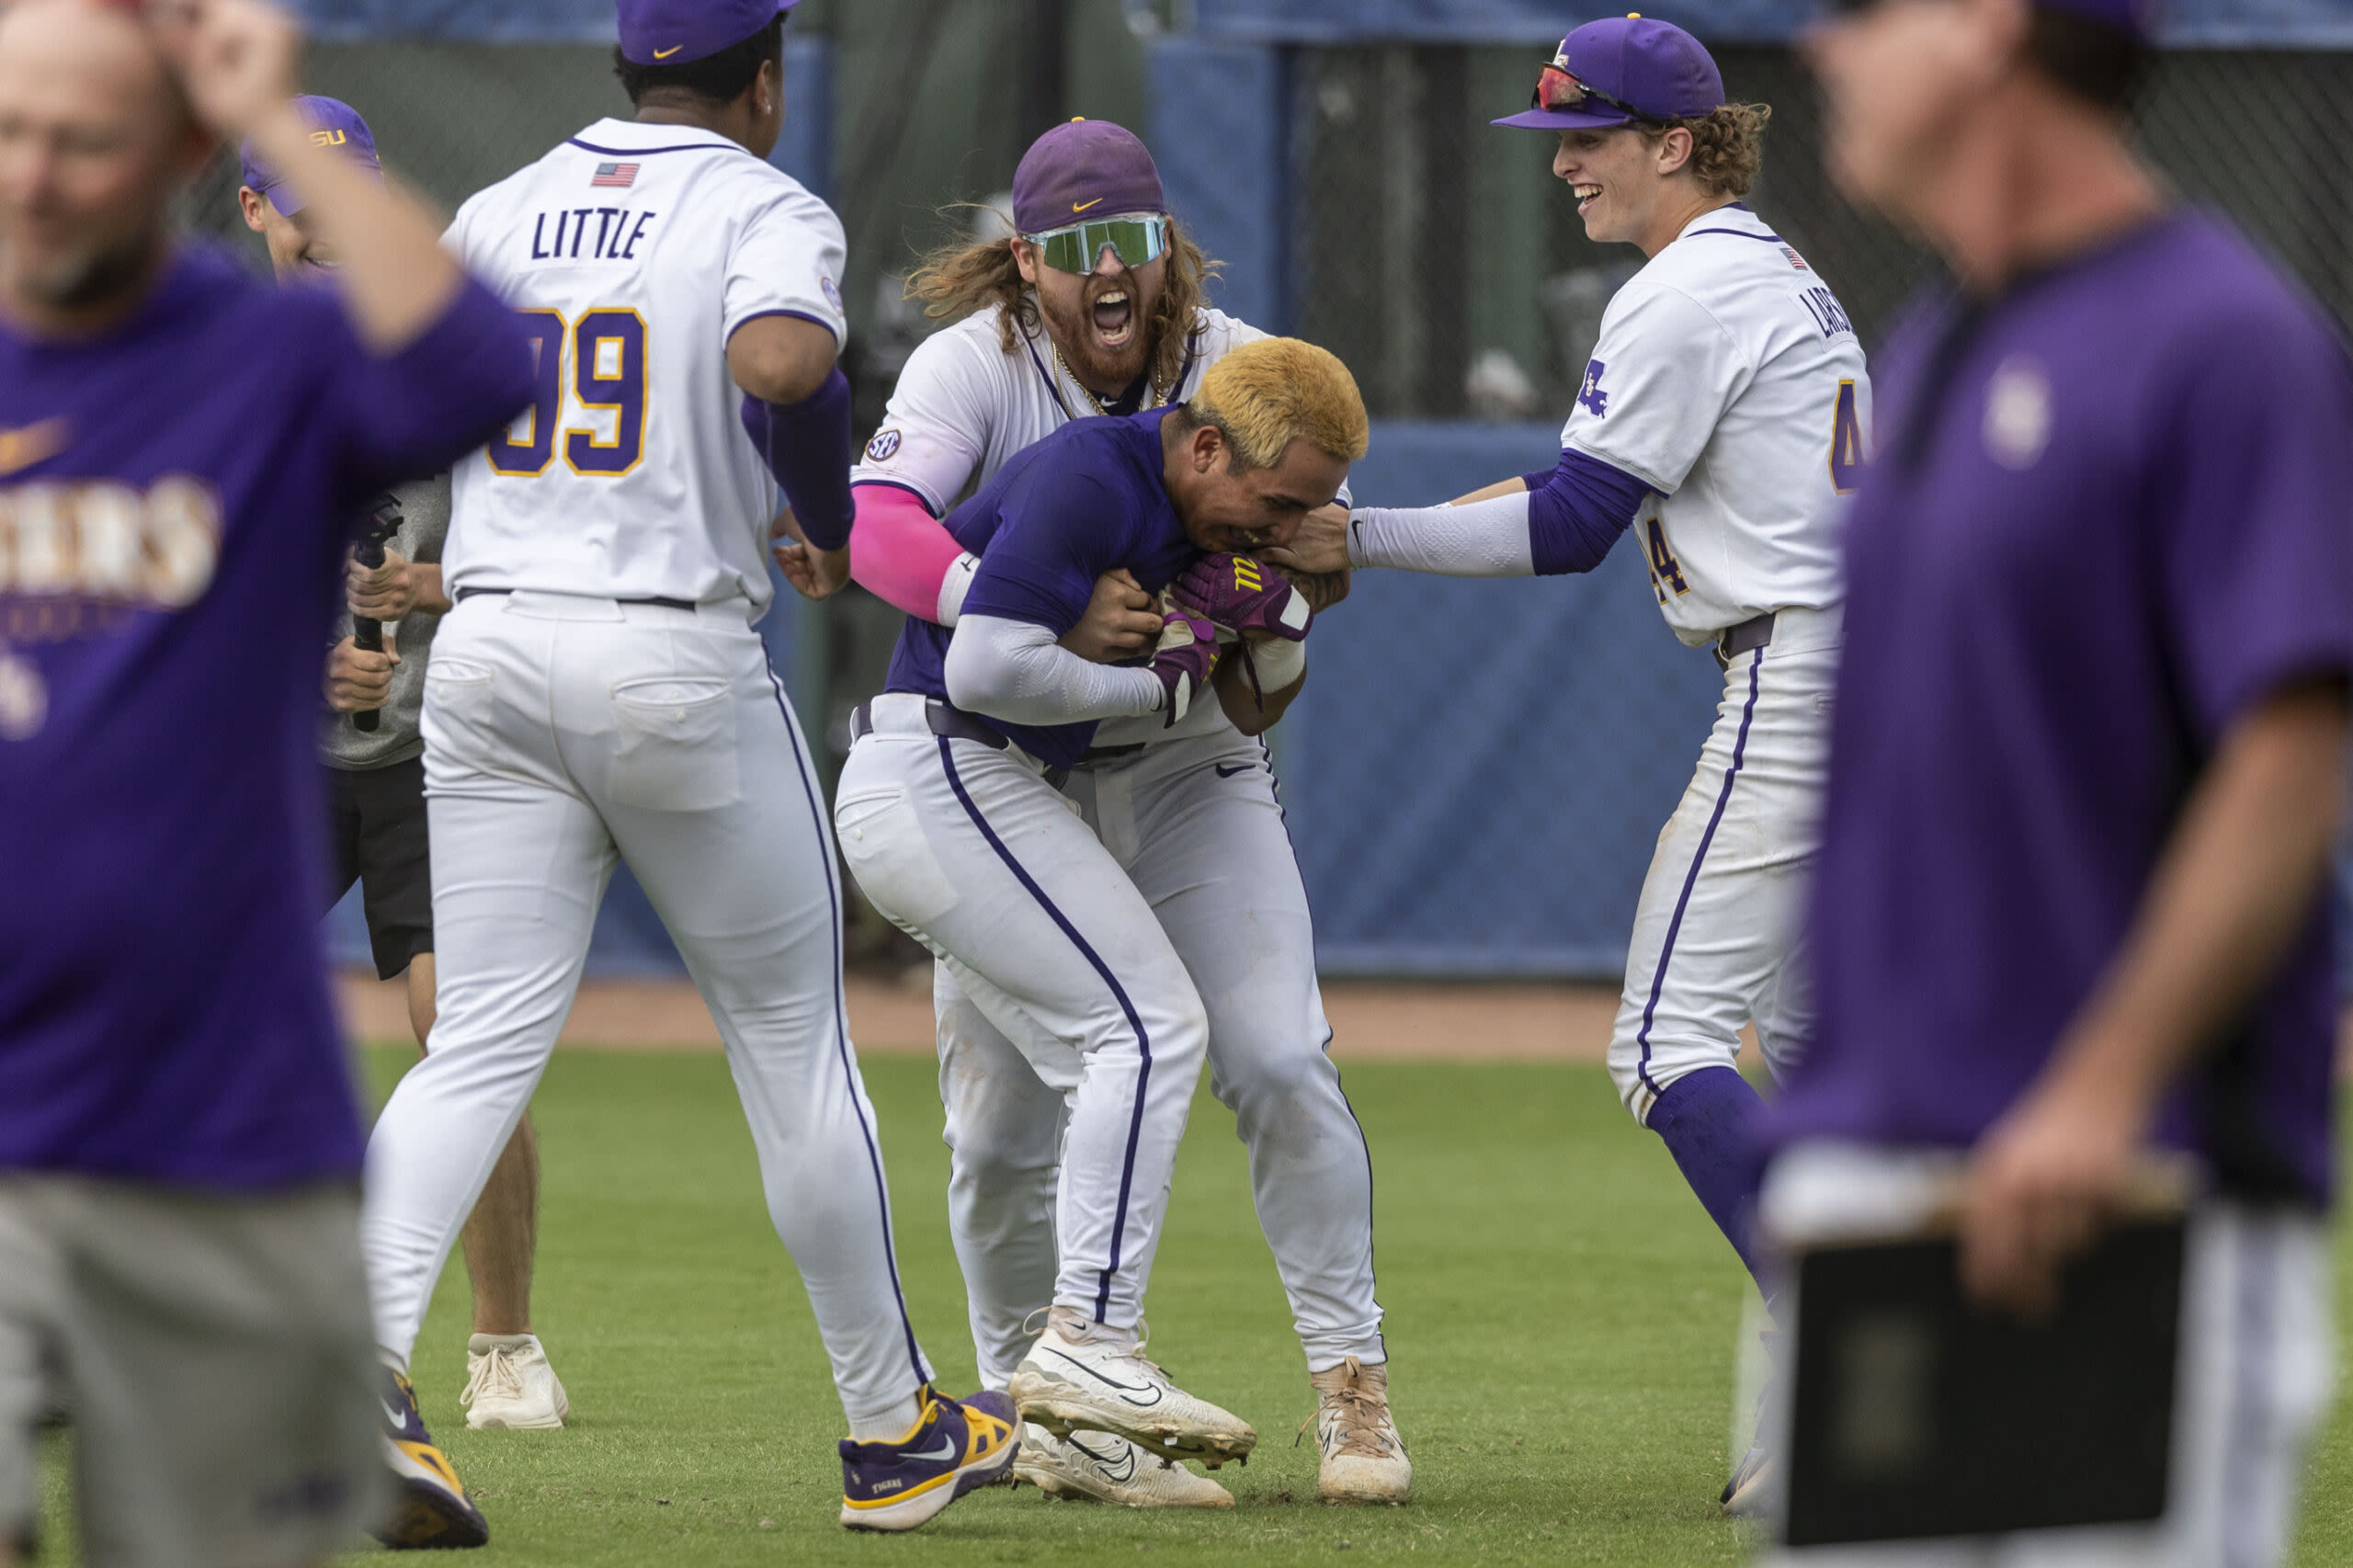 ‘Monster’ moment for Steven Milam as LSU walks it off to beat Wofford in Chapel Hill Regional opener